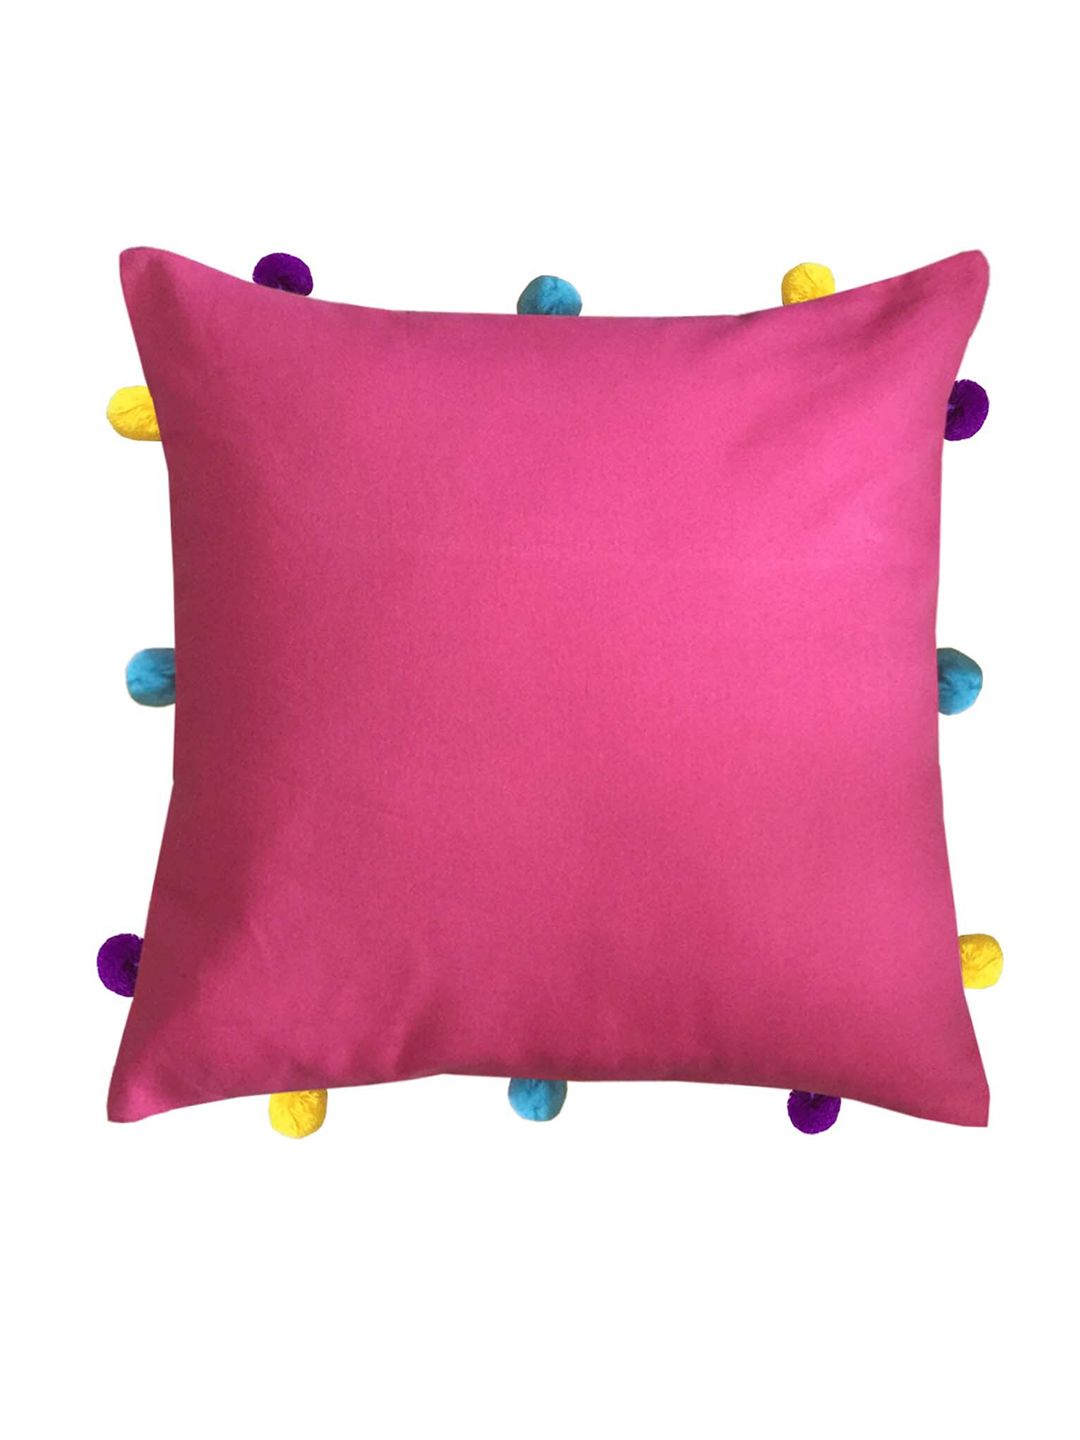 Lushomes Pink & Yellow Square Cushion Covers Price in India